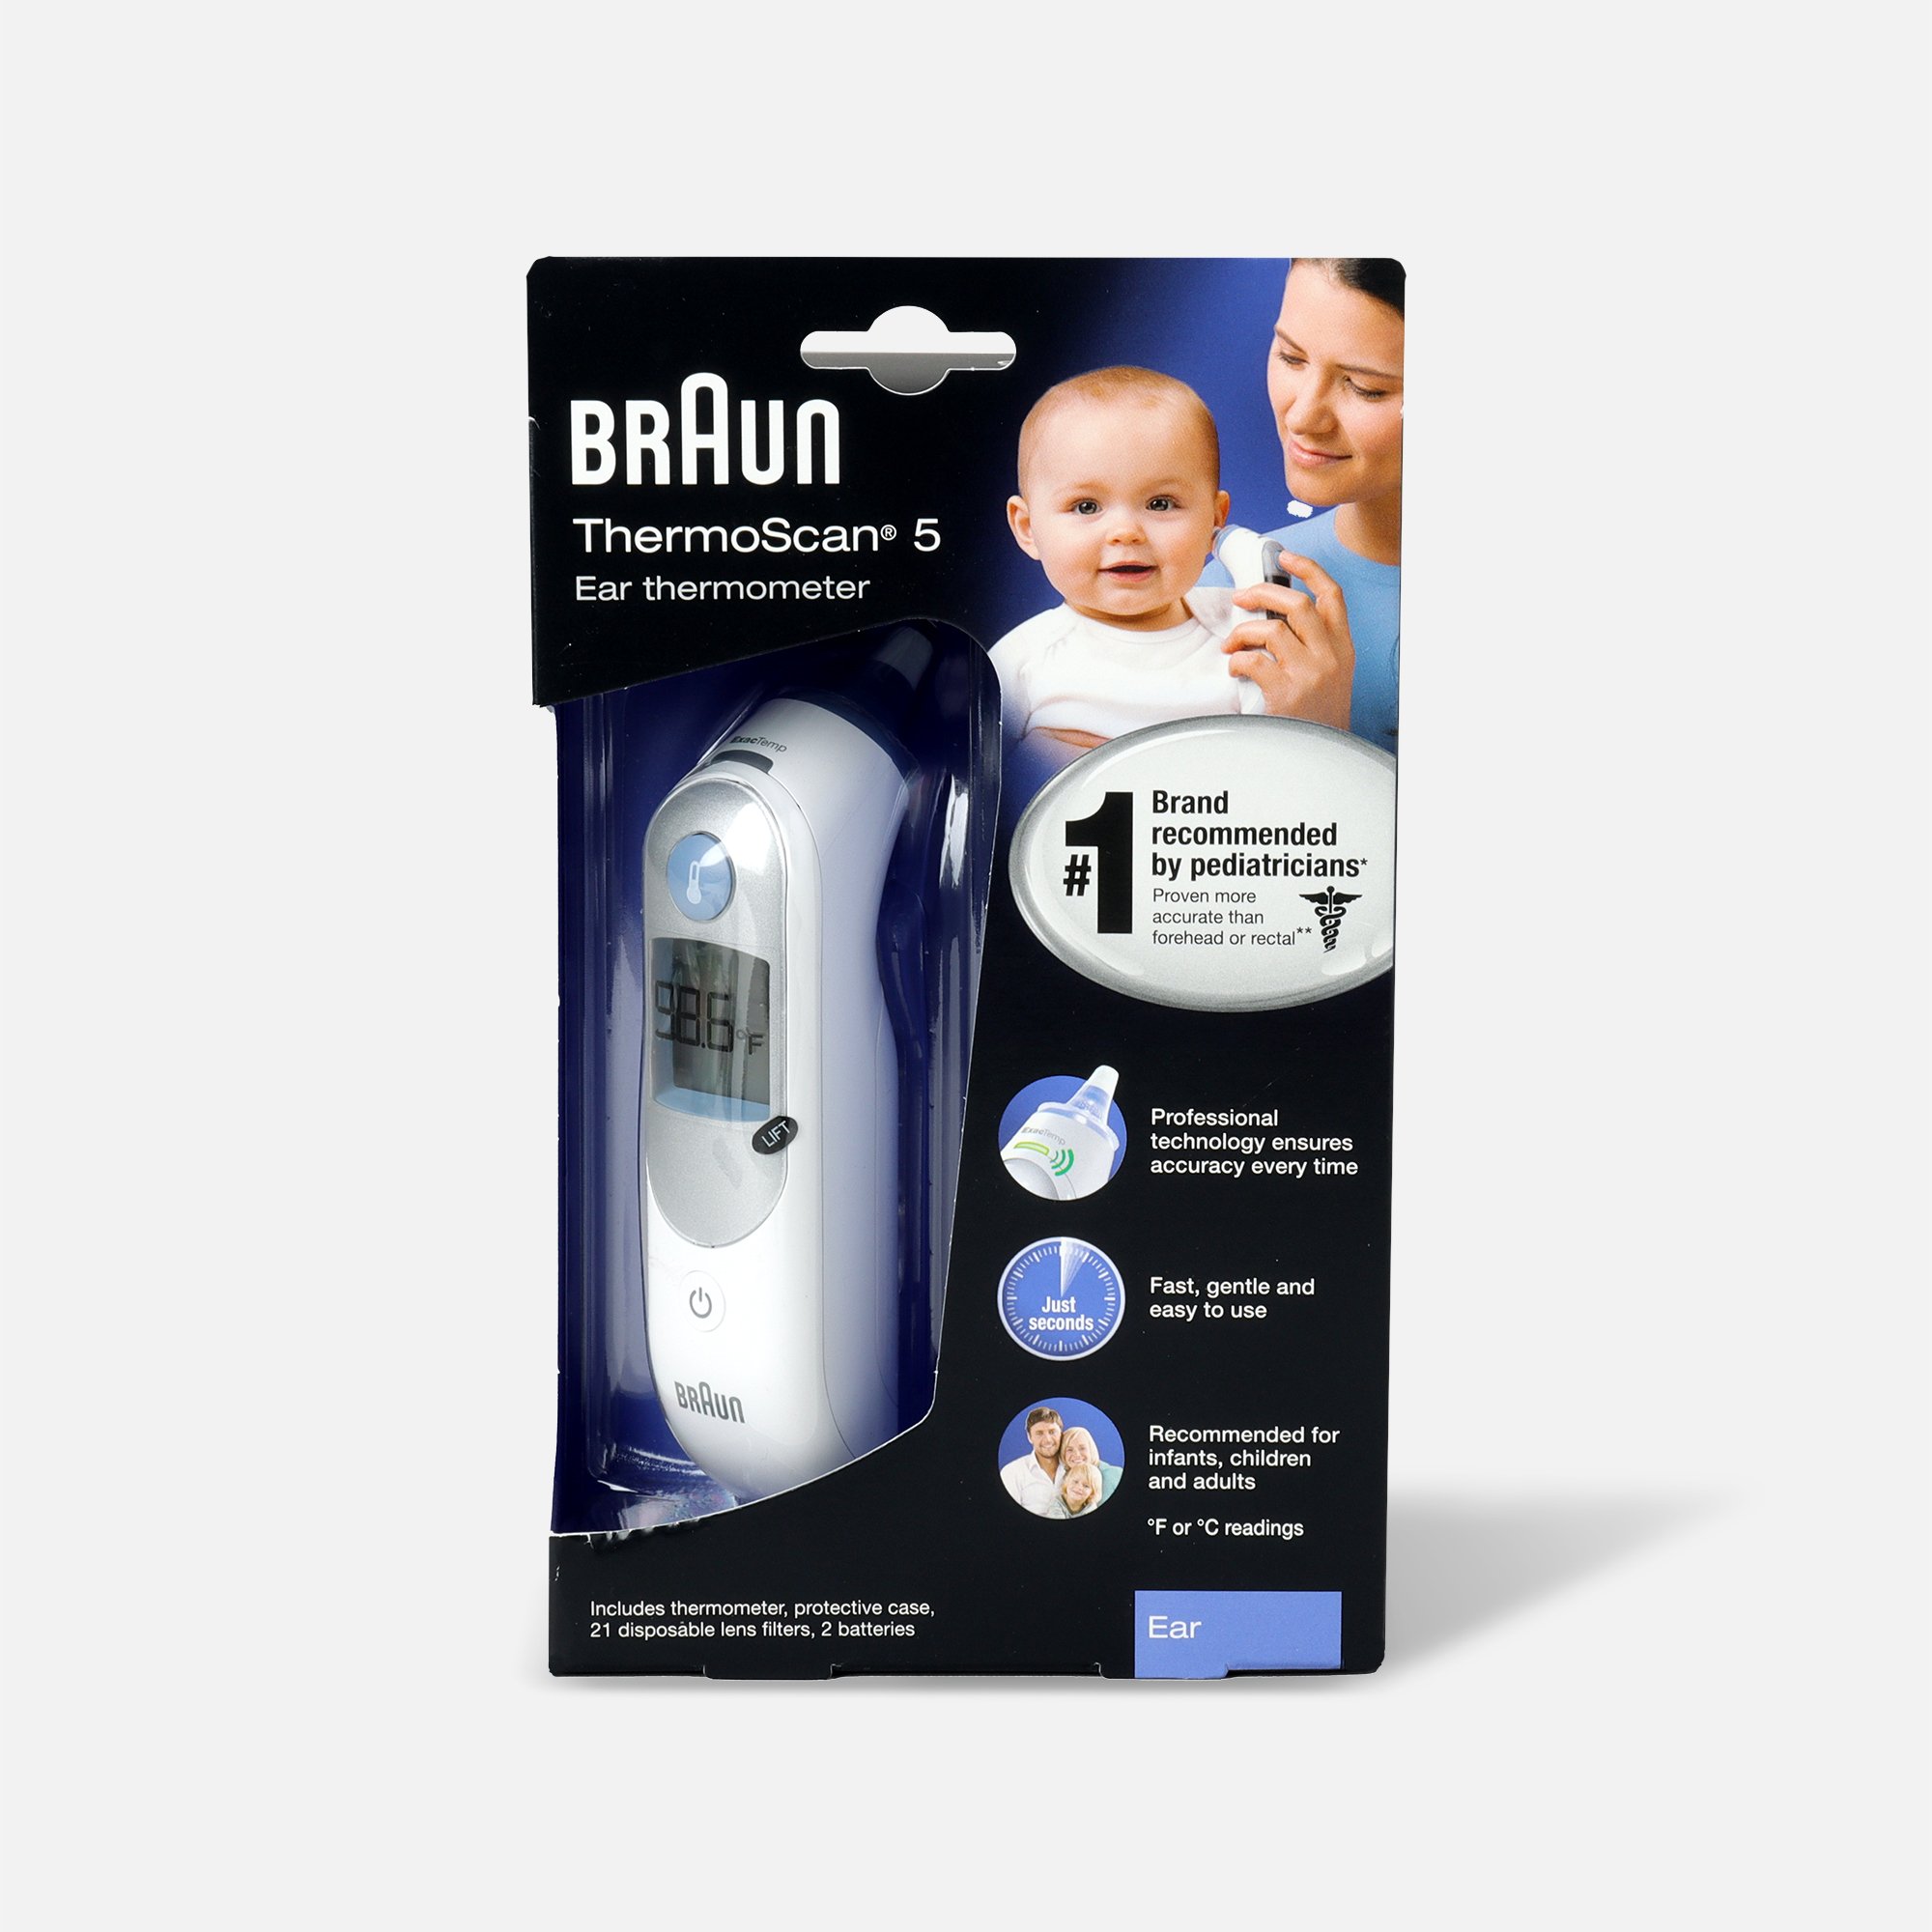 ThermoScan 5 Ear Thermometer